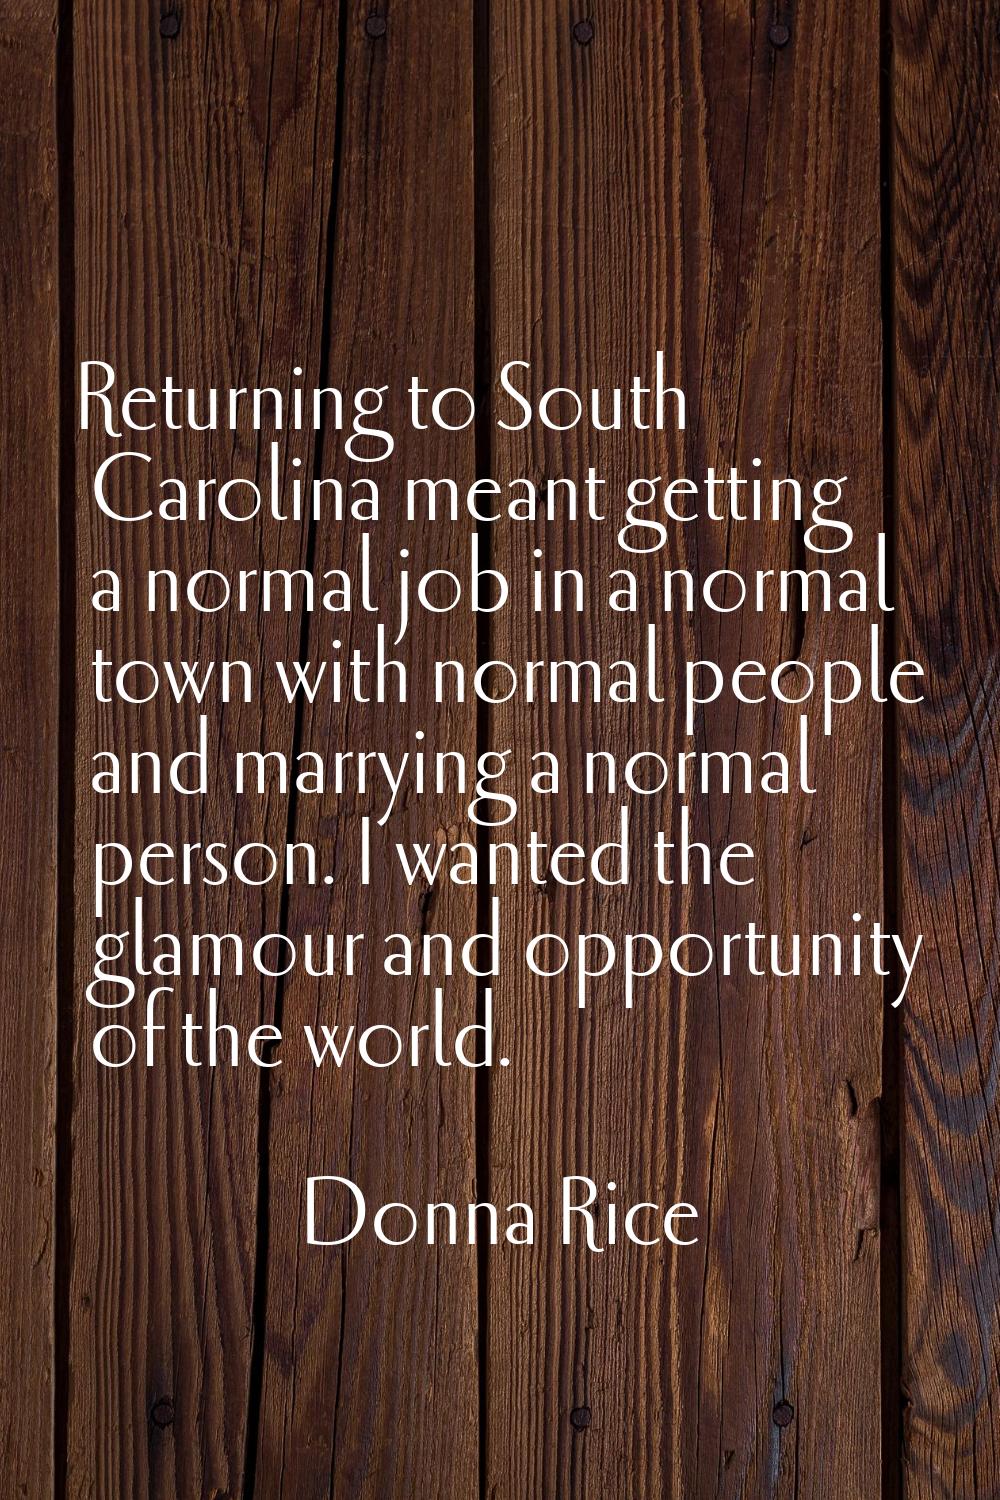 Returning to South Carolina meant getting a normal job in a normal town with normal people and marr